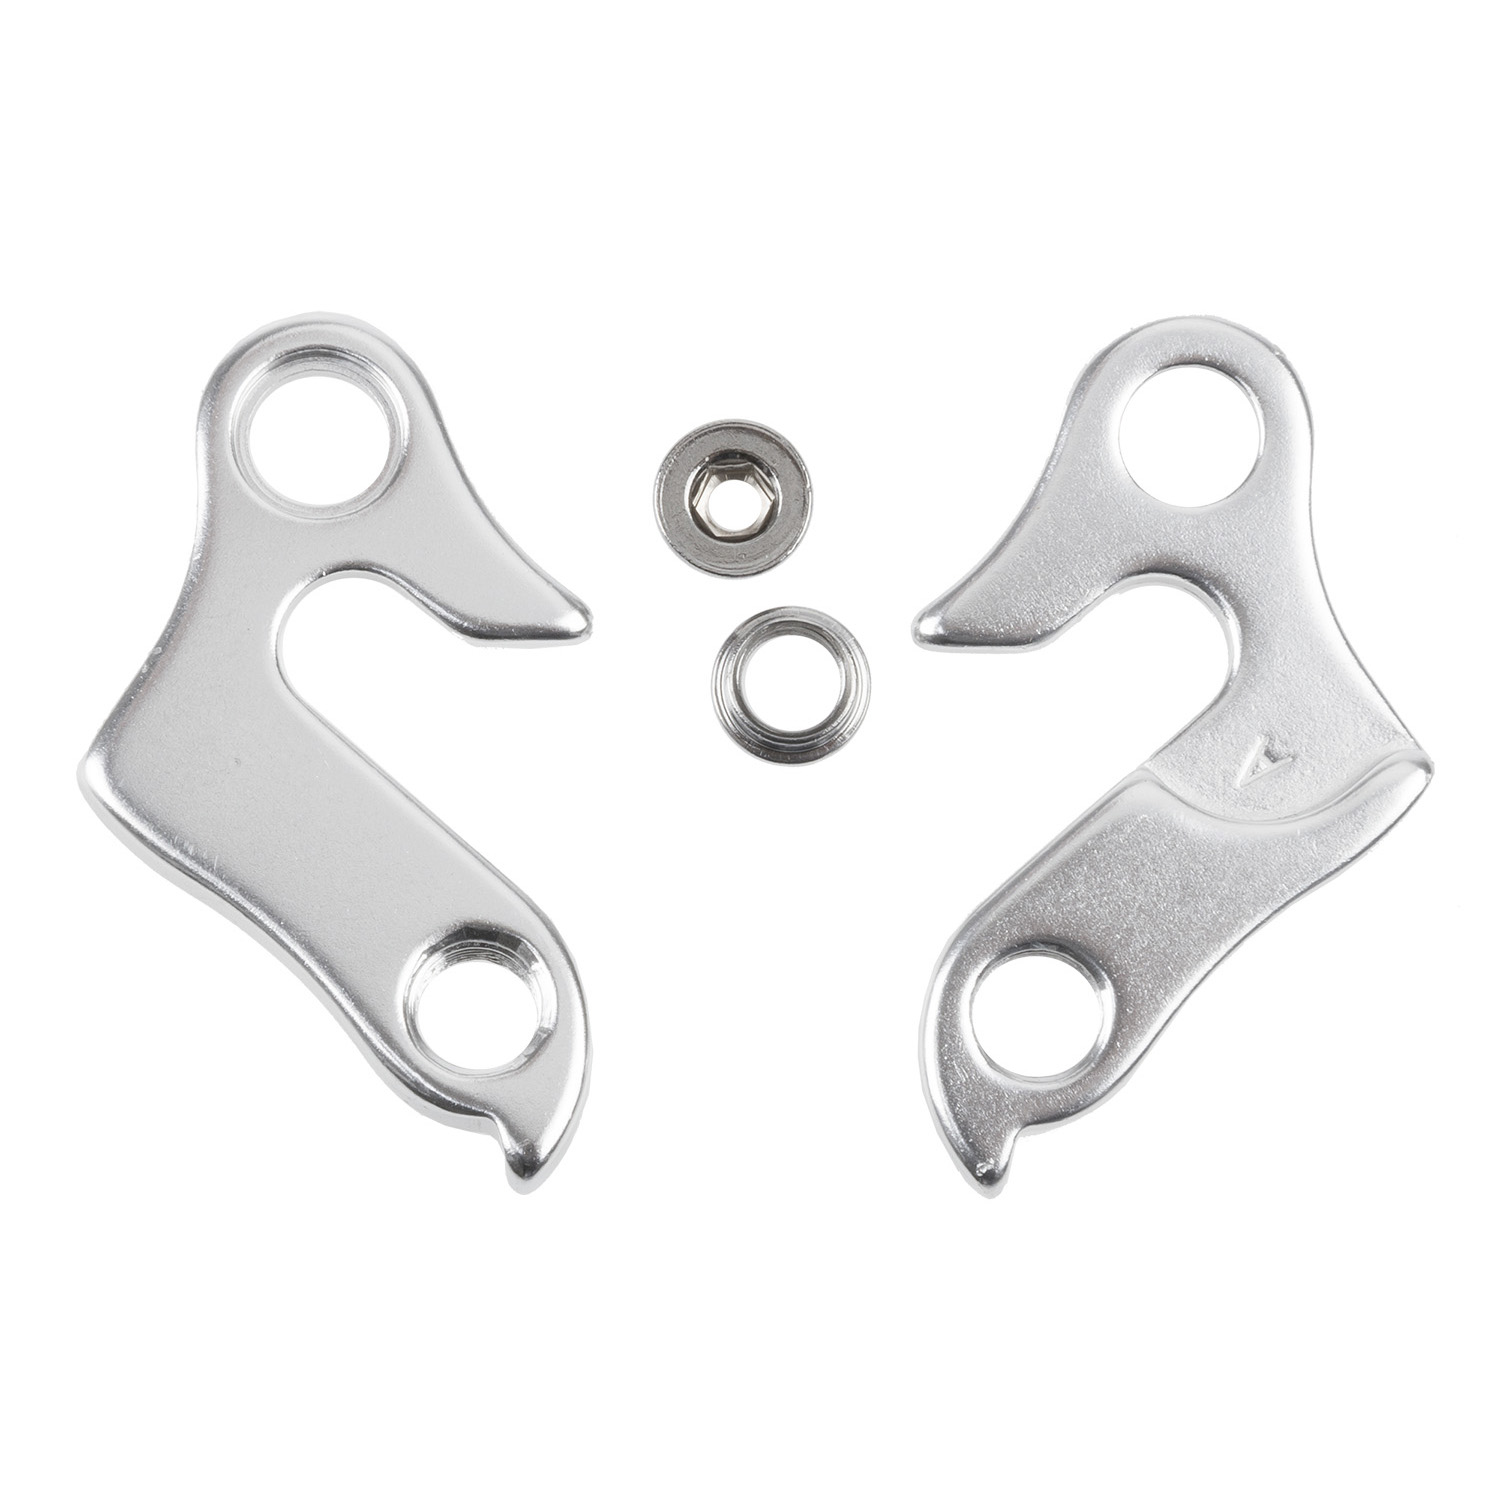 660853 S1 derailleur hanger – AVAILABLE IN SELECTED BIKE SHOPS